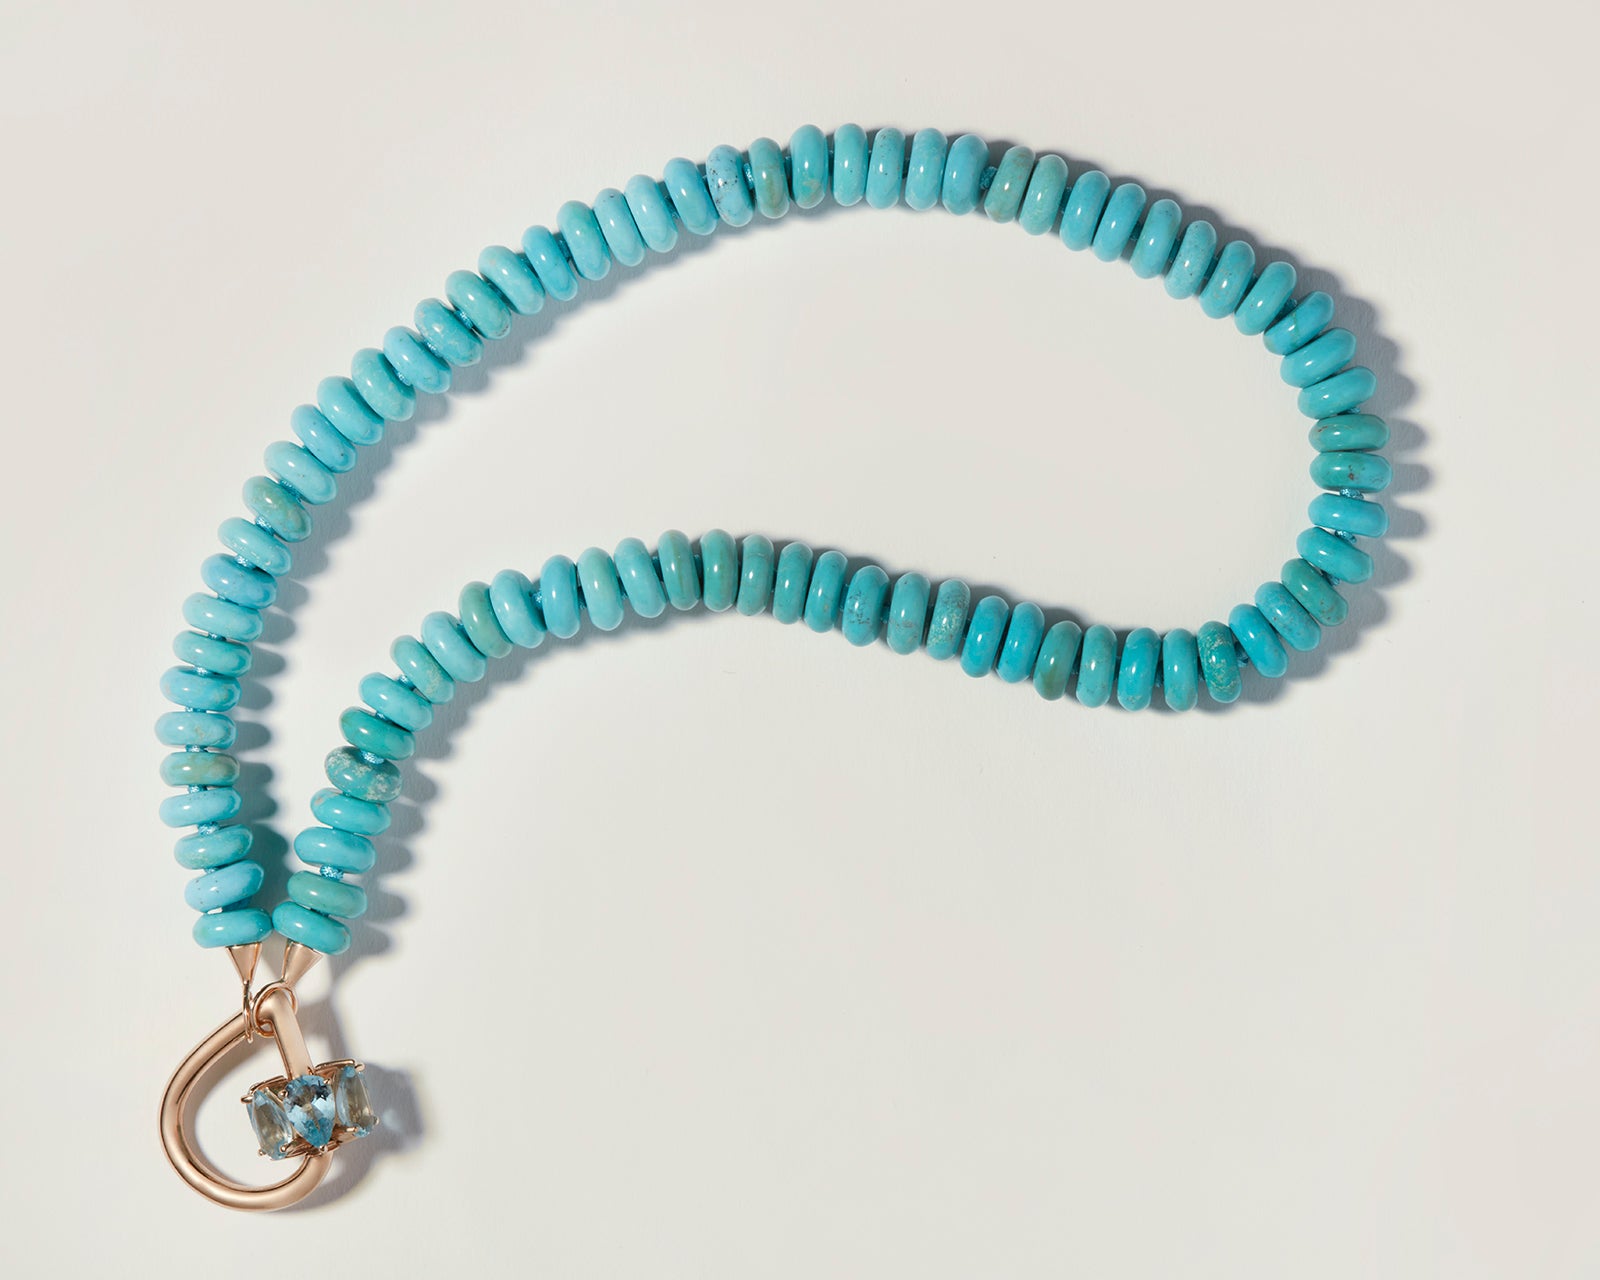 Gold droplock charm with blue gemstones attached to turquoise beaded necklace